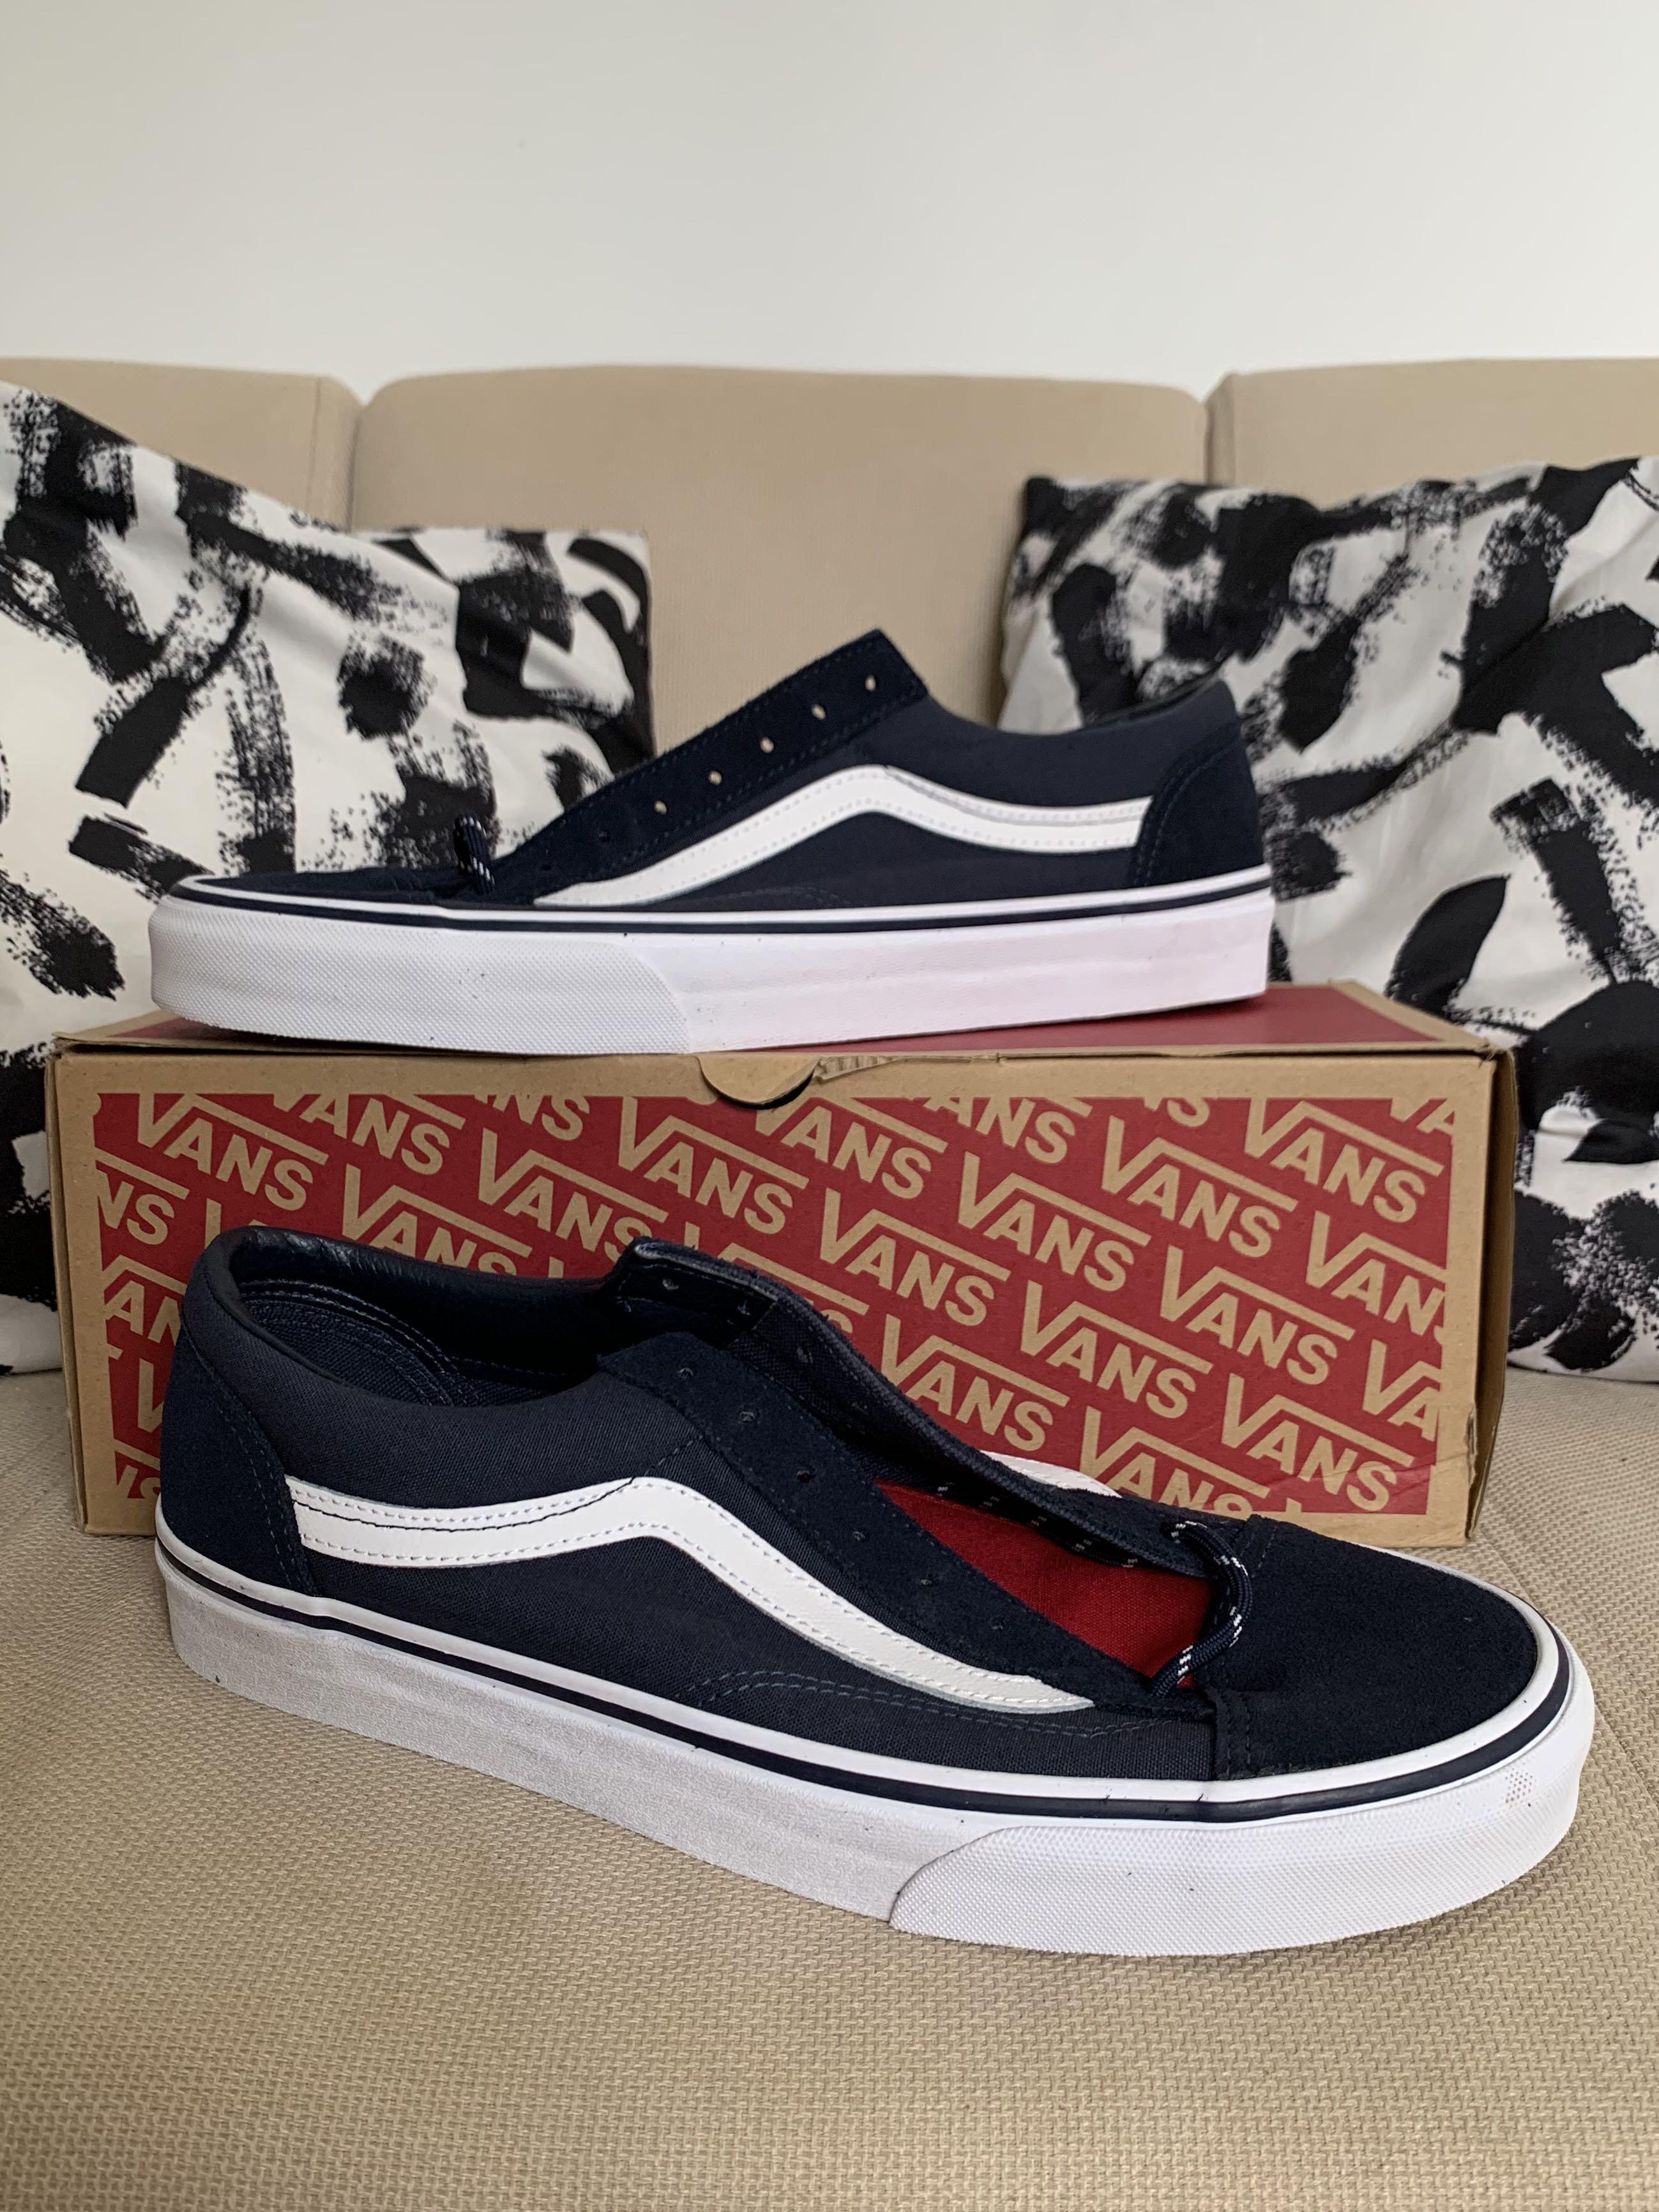 vans style 36 blue red